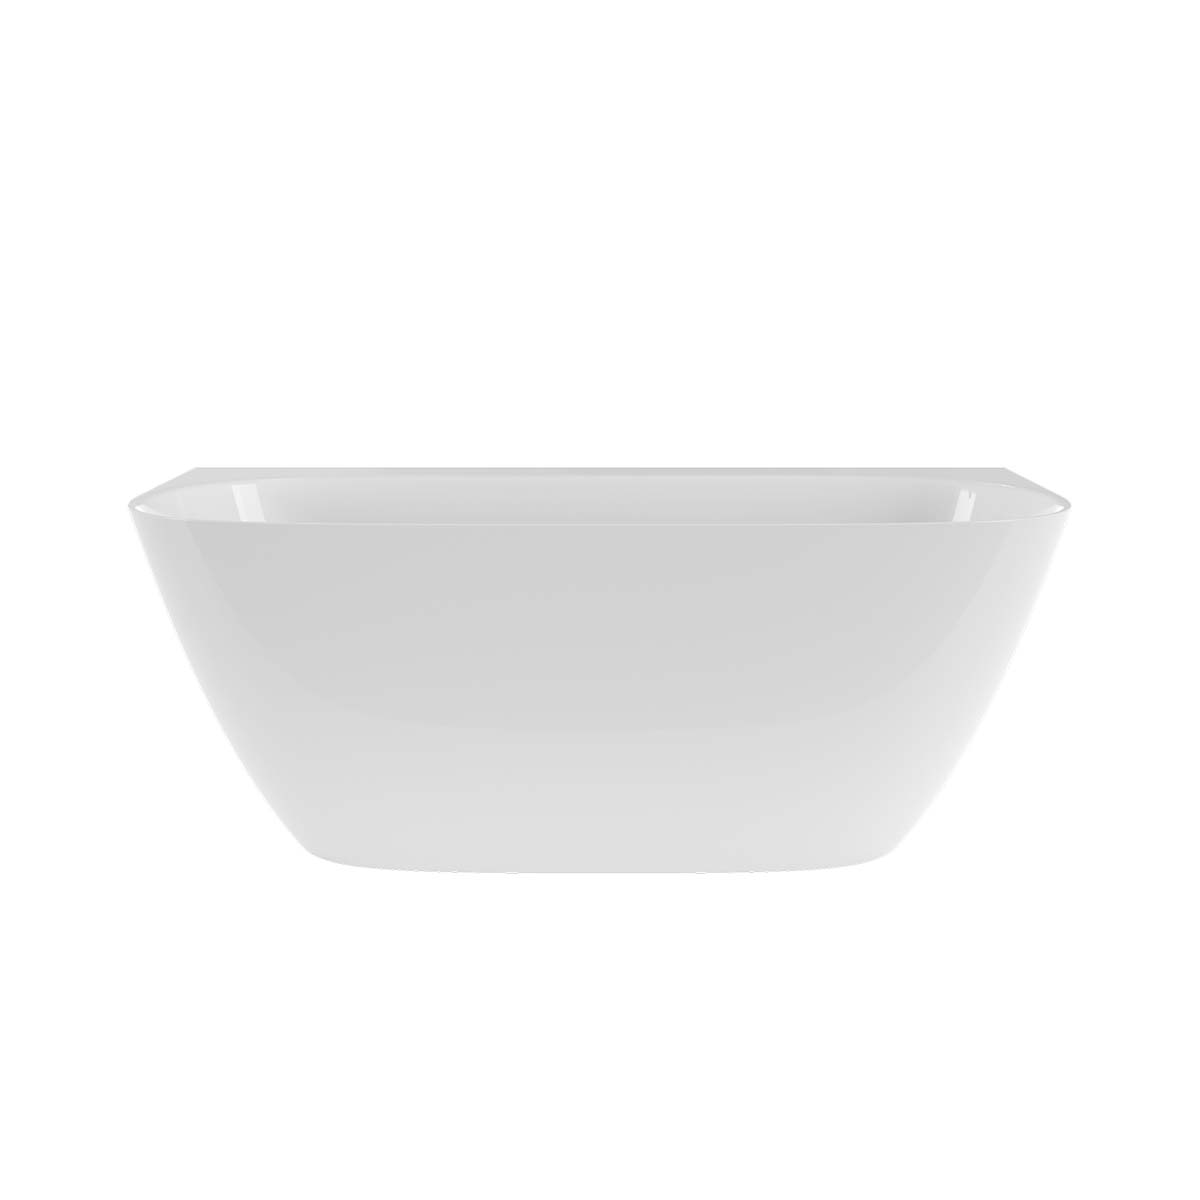 Victoria + Albert Lussari 1600 back to wall bath in gloss white. Also available in matt white or custom colour exterior. Distributed in Australia by Luxe by Design, Brisbane.